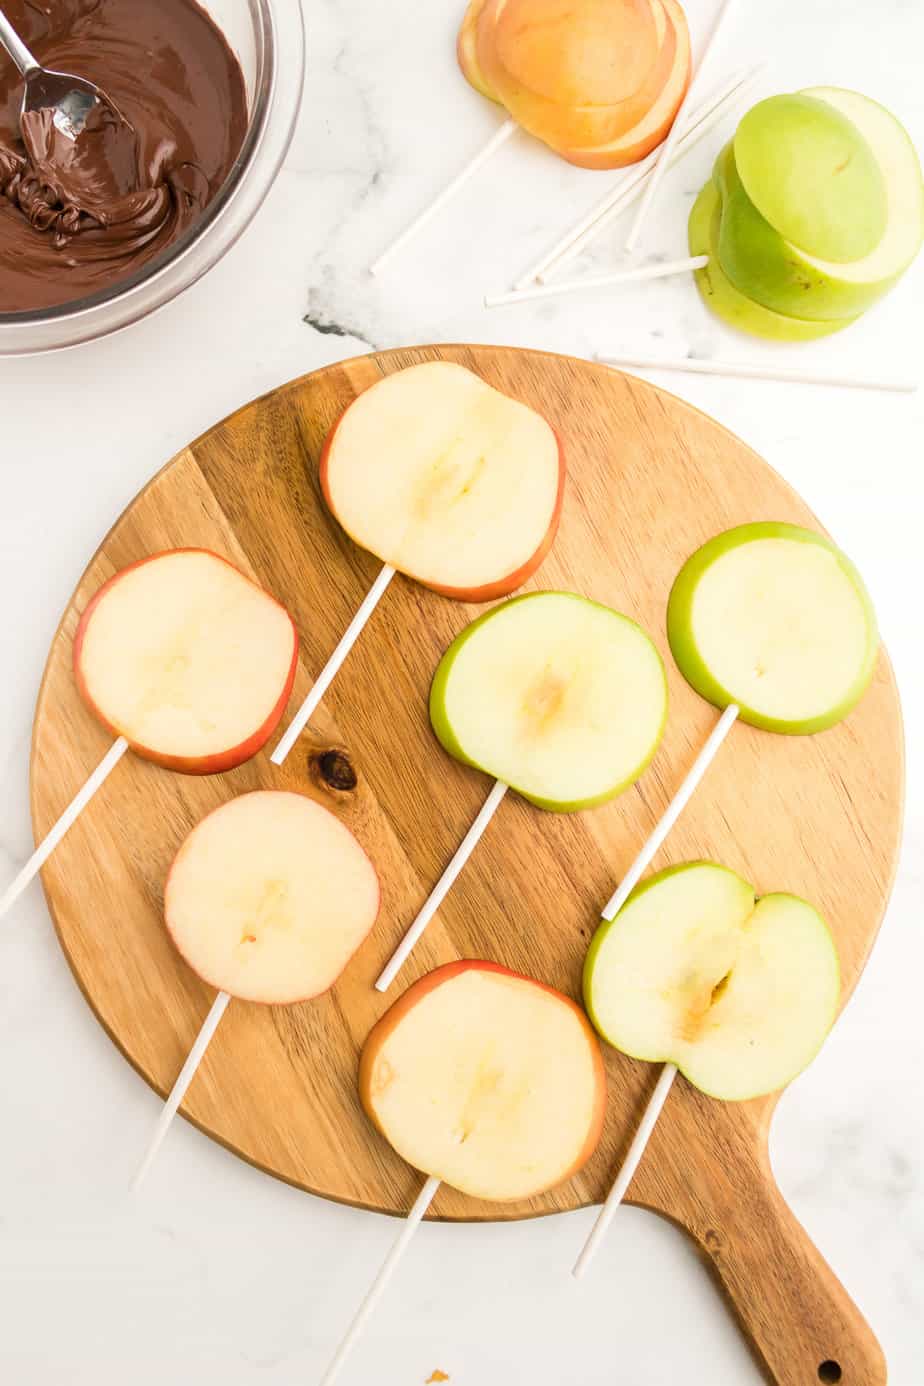 Fresh slices of apple cut into rounds with sticks added from the bottom on a cutting board from overhead on a counter with melted chocolate and more apples nearby.